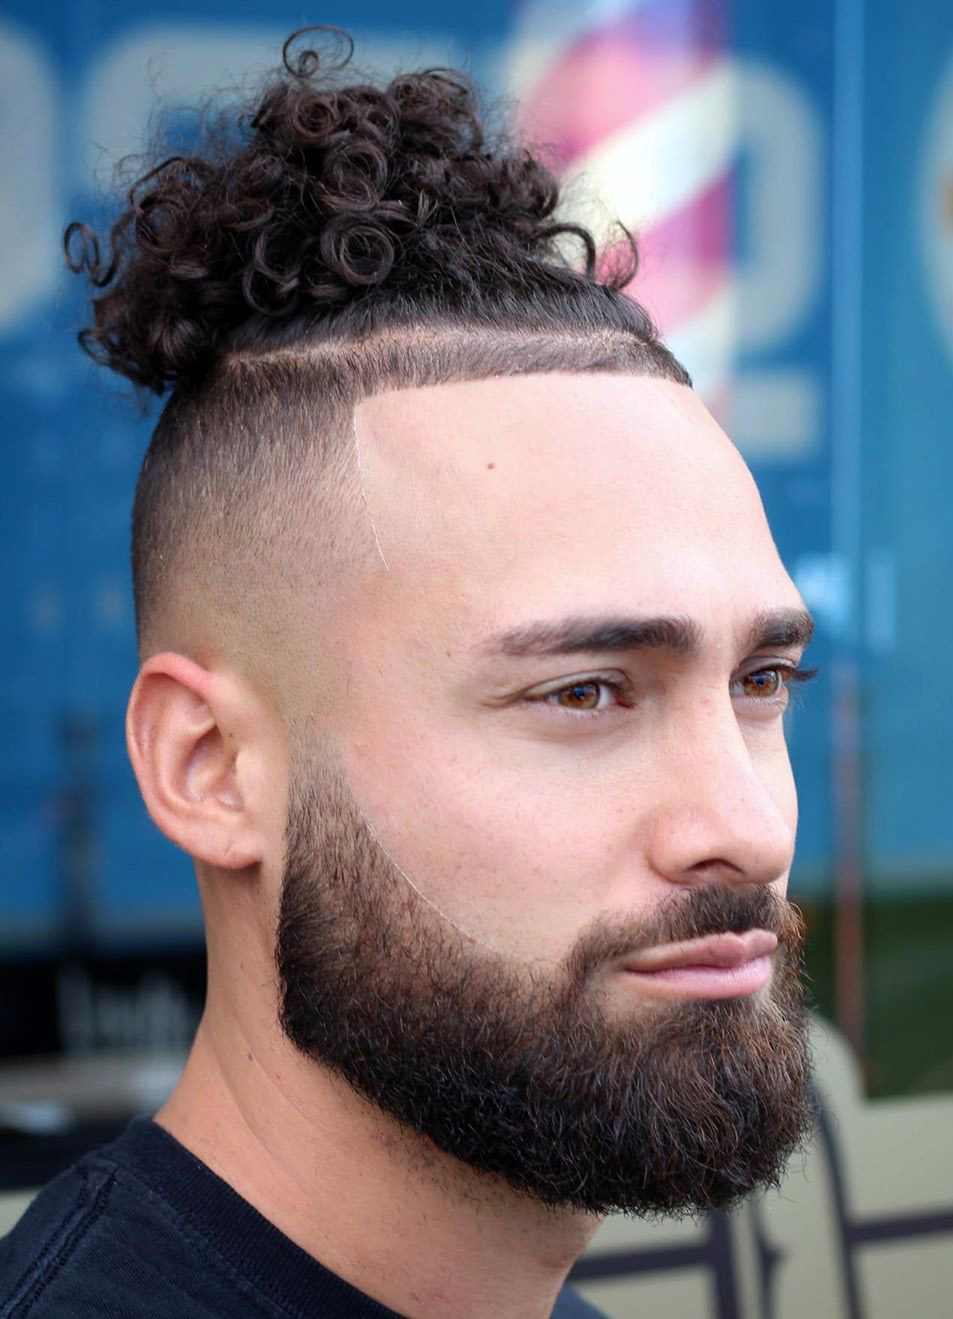 7 Types Of Man Bun Hairstyles Gallery How To